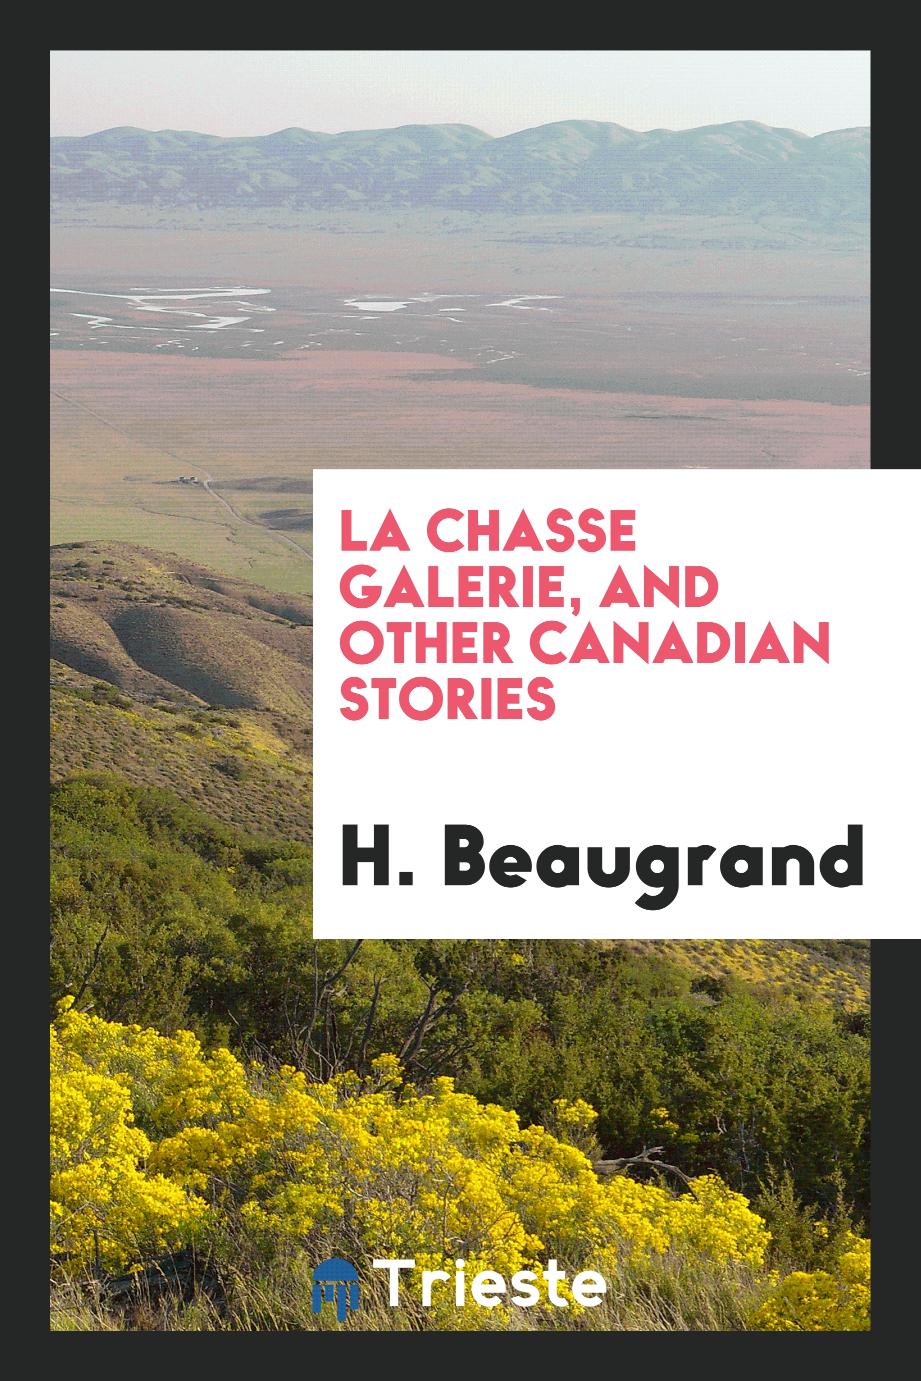 La chasse galerie, and other Canadian stories